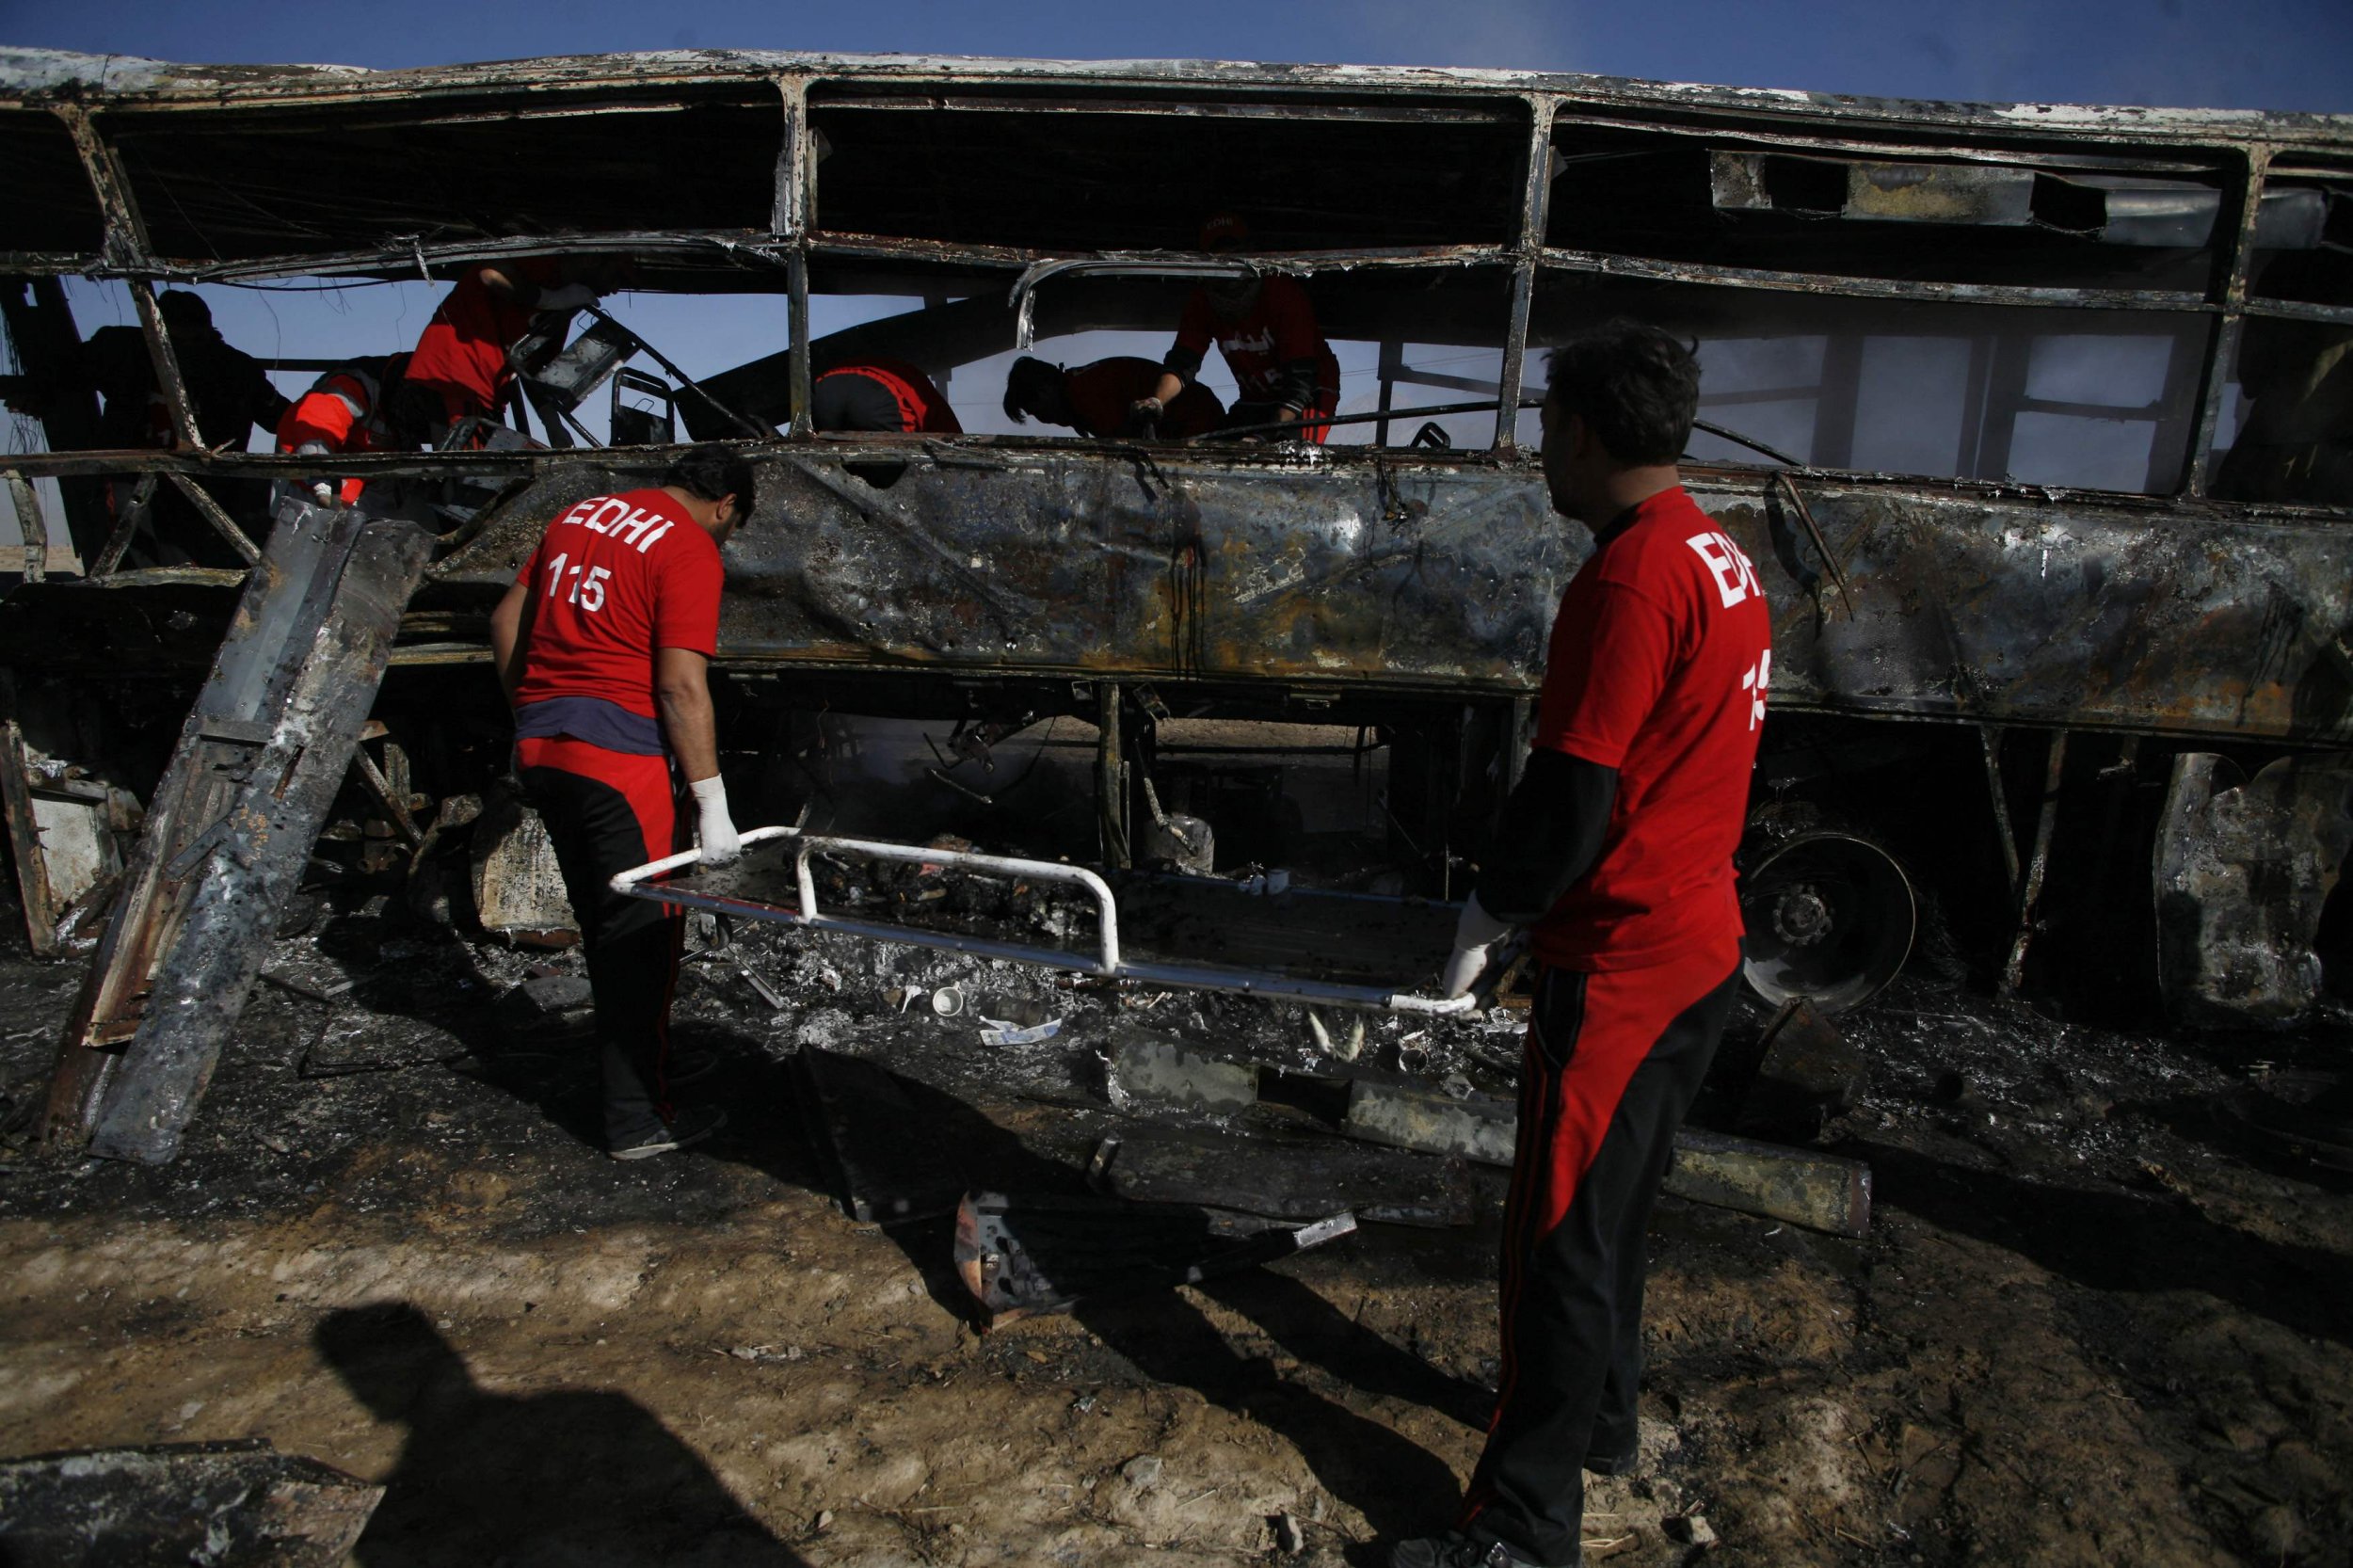 Emergency personnel transport burnt human remains on a stretcher after a car bomb exploded in Quetta